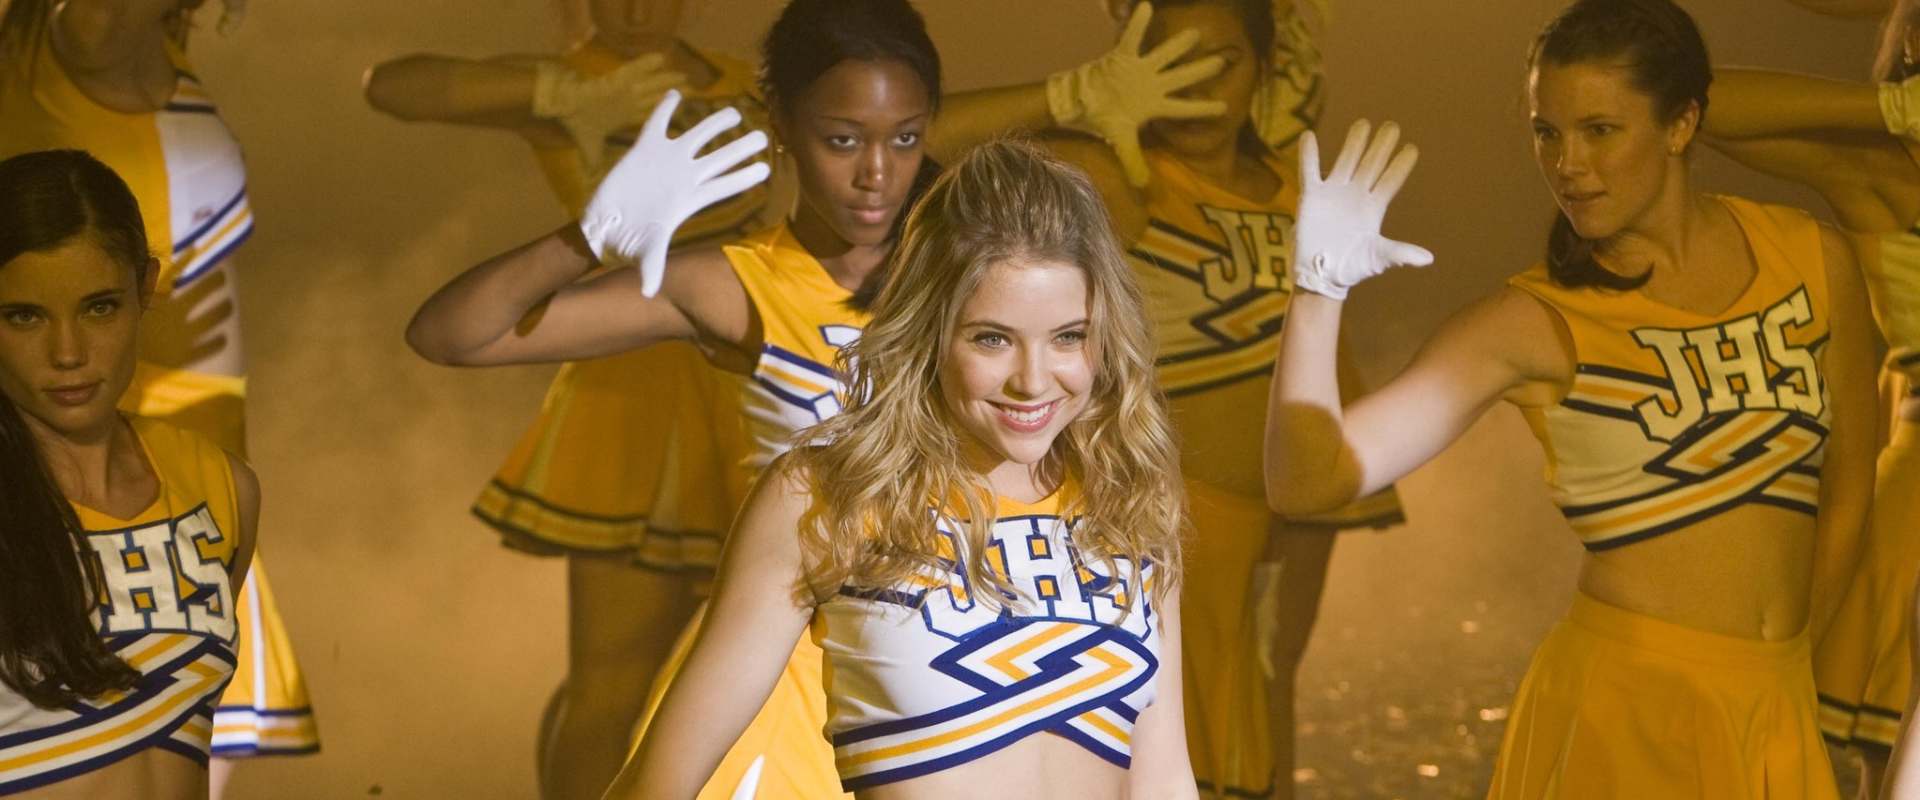 Fab Five: The Texas Cheerleader Scandal background 2